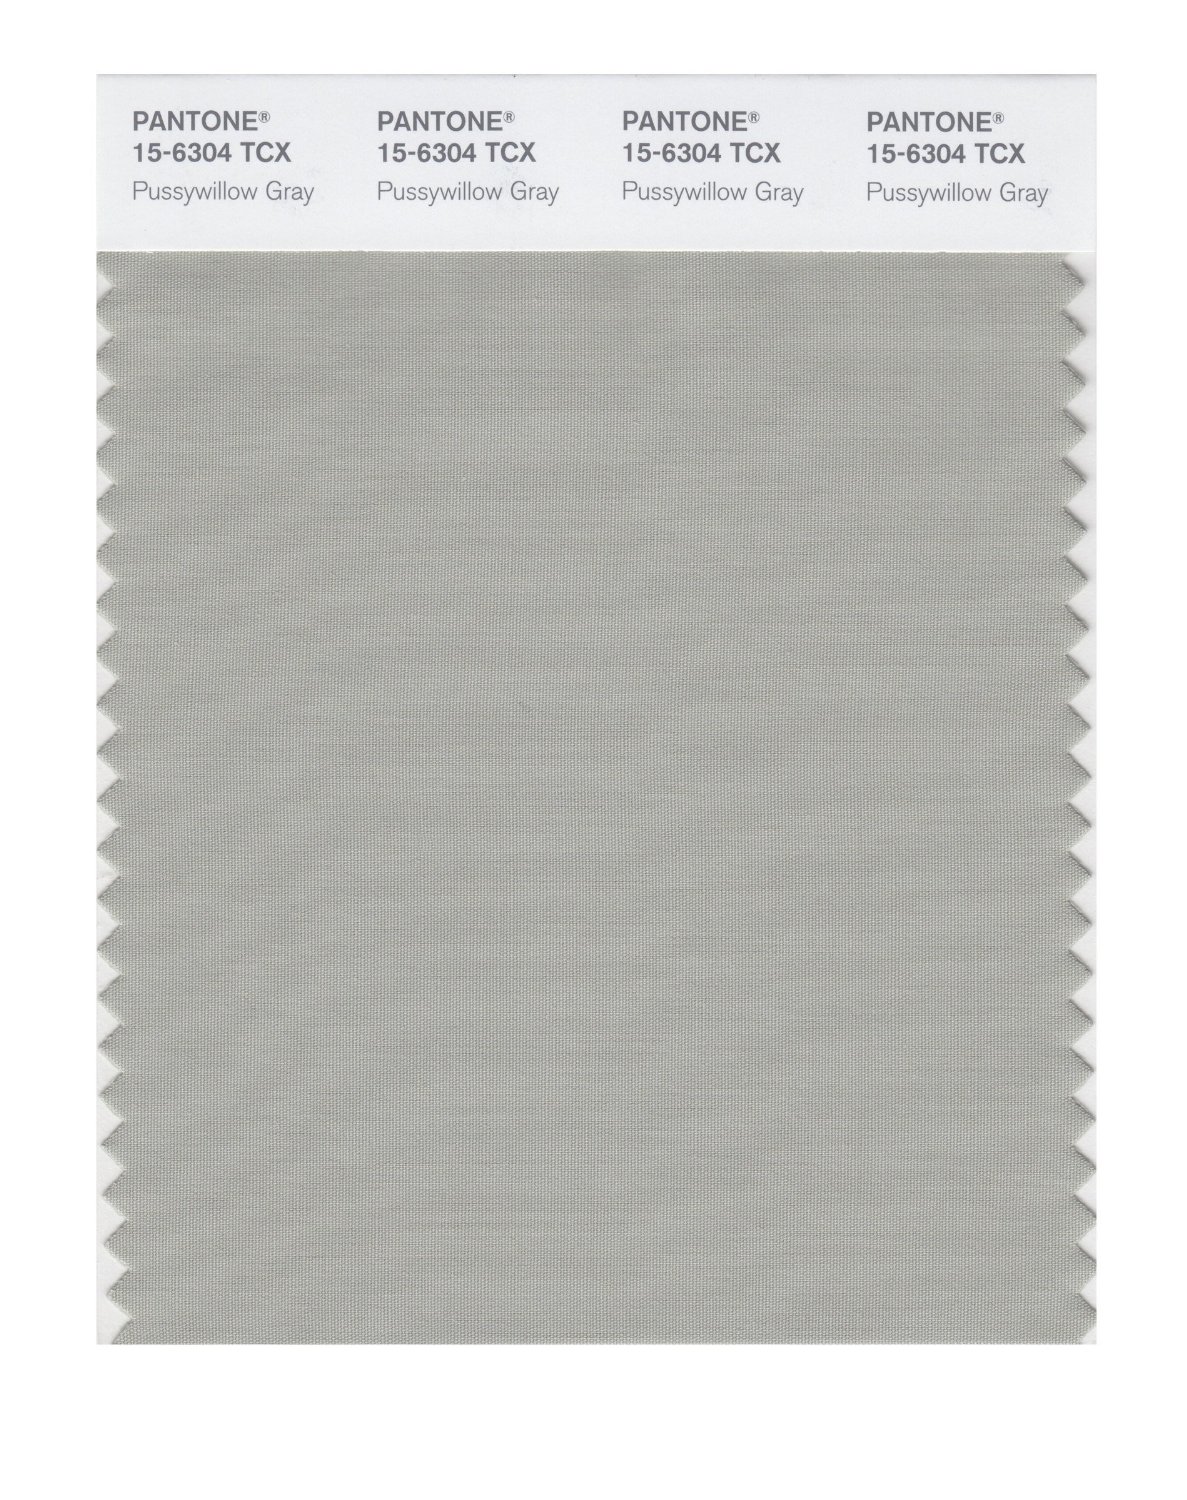 Pantone Cotton Swatch 15-6304 Pussywillow Gra